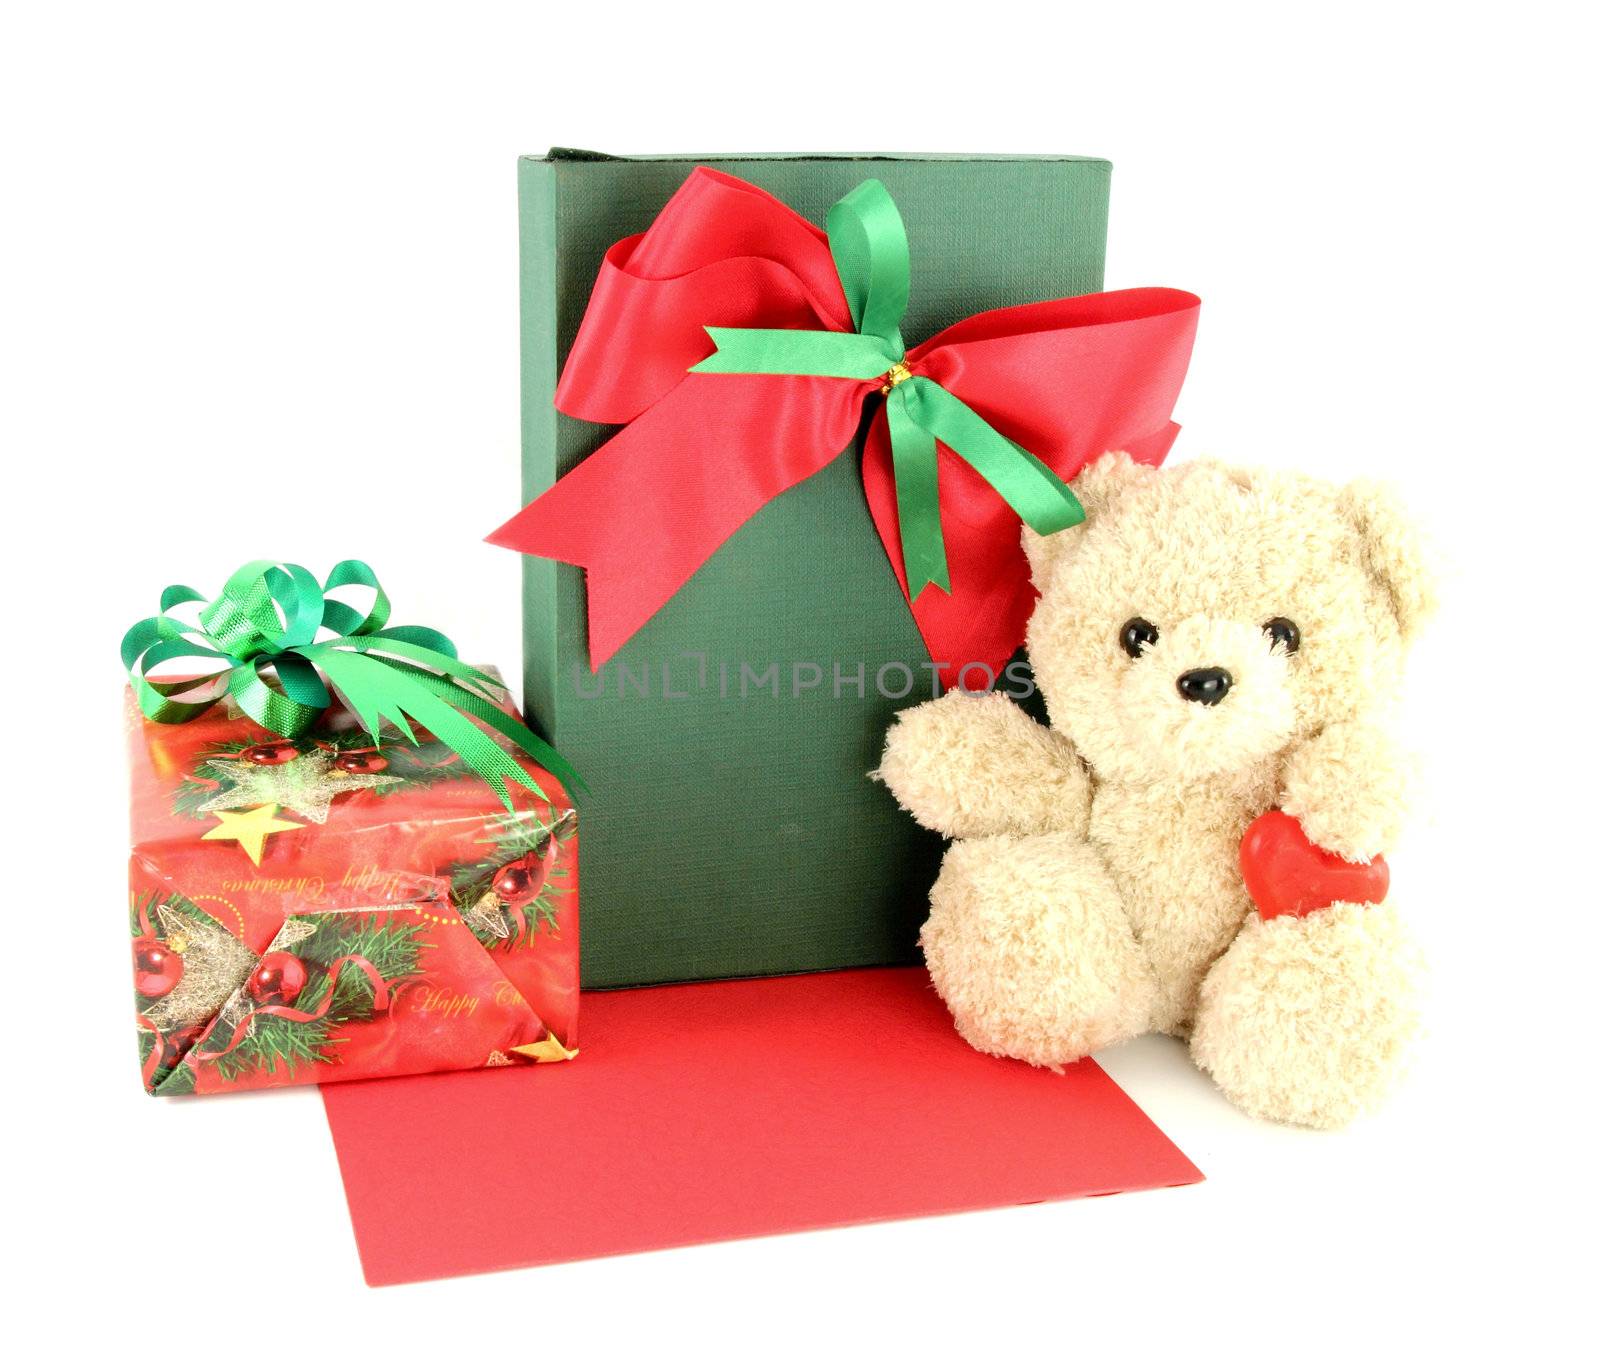 Teddy bear and card and gift on white background by geargodz